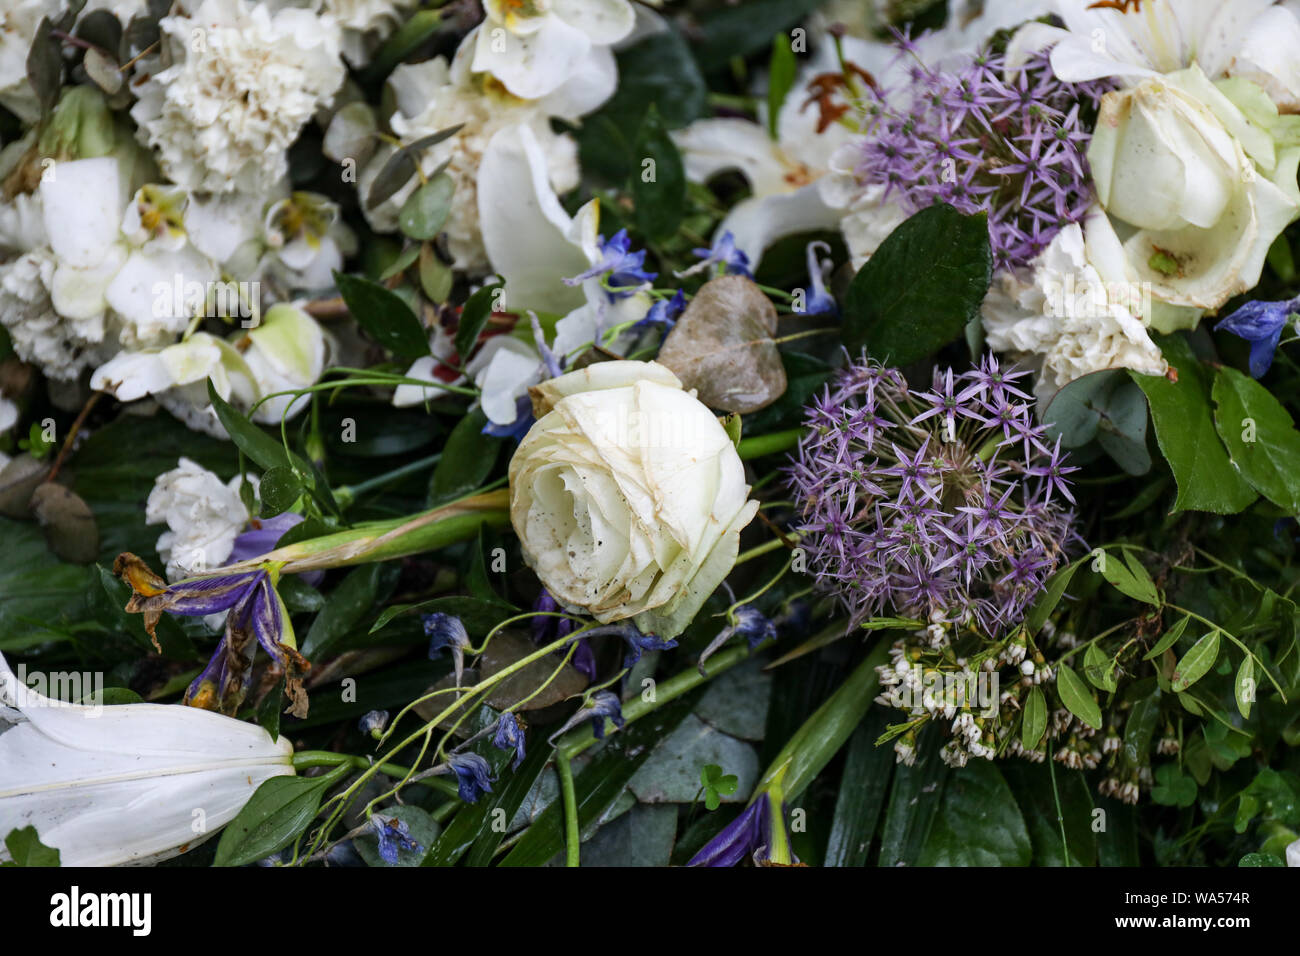 Slightly withered funeral flowers on a grave Stock Photo